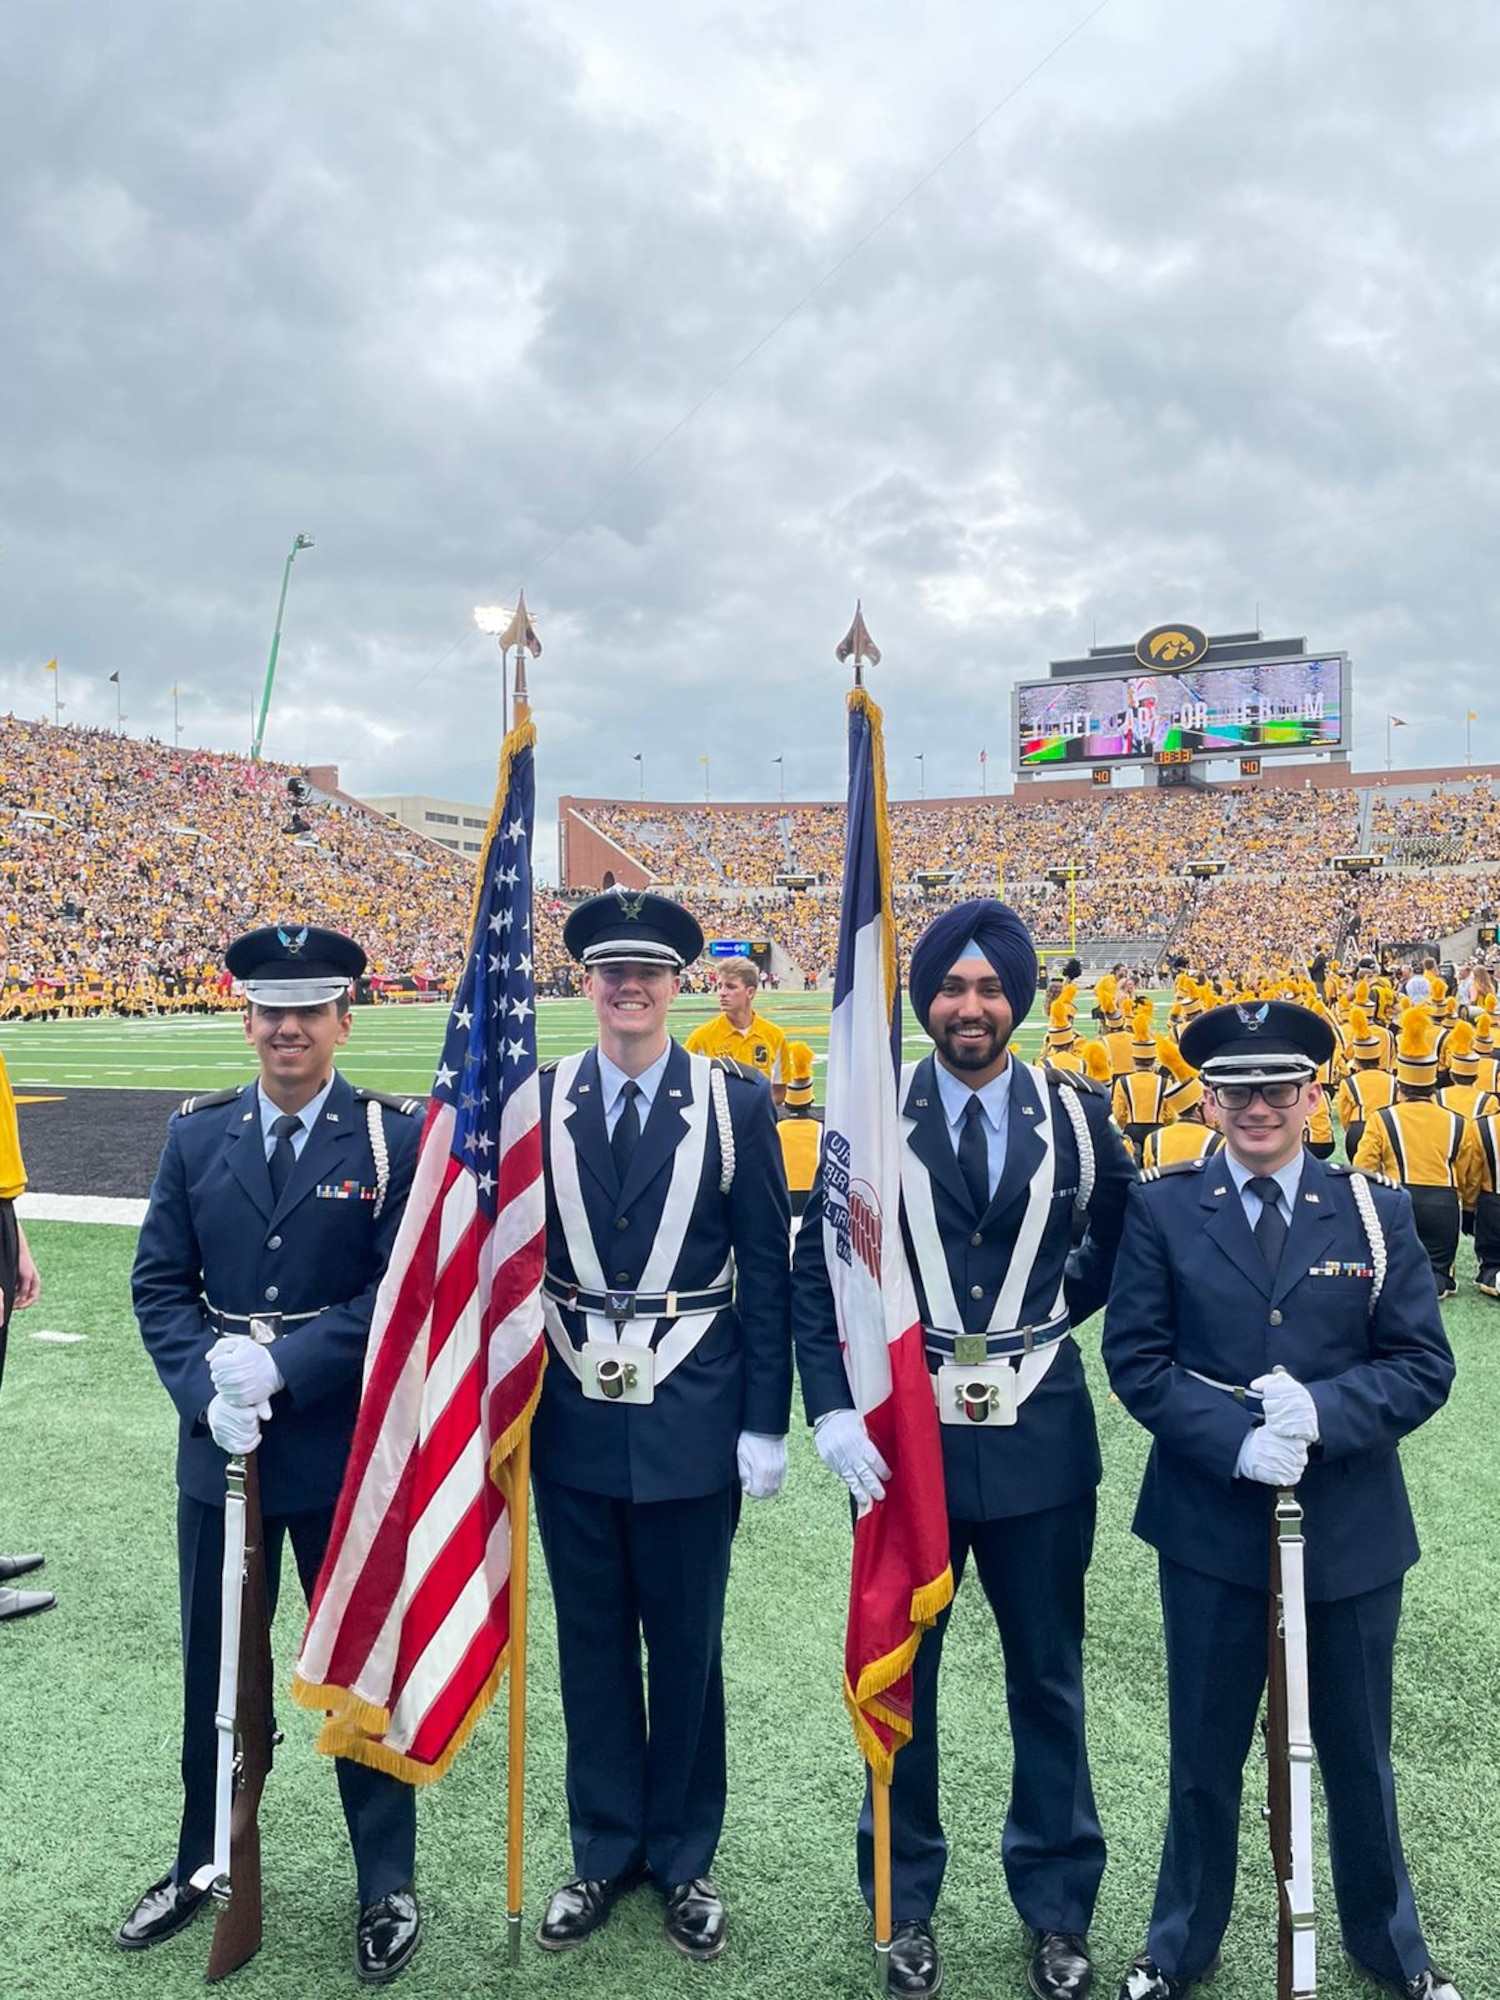 Air Force ROTC Cadet Gursharan Virk takes part in Detachment 255’s color guard at football game at the University of Iowa in 2021. Virk is the first Sikh ROTC cadet to be granted religious accommodations by the Air Force in observation of his faith. The accommodations include wear of a turban and facial hair. (Courtesy photo)